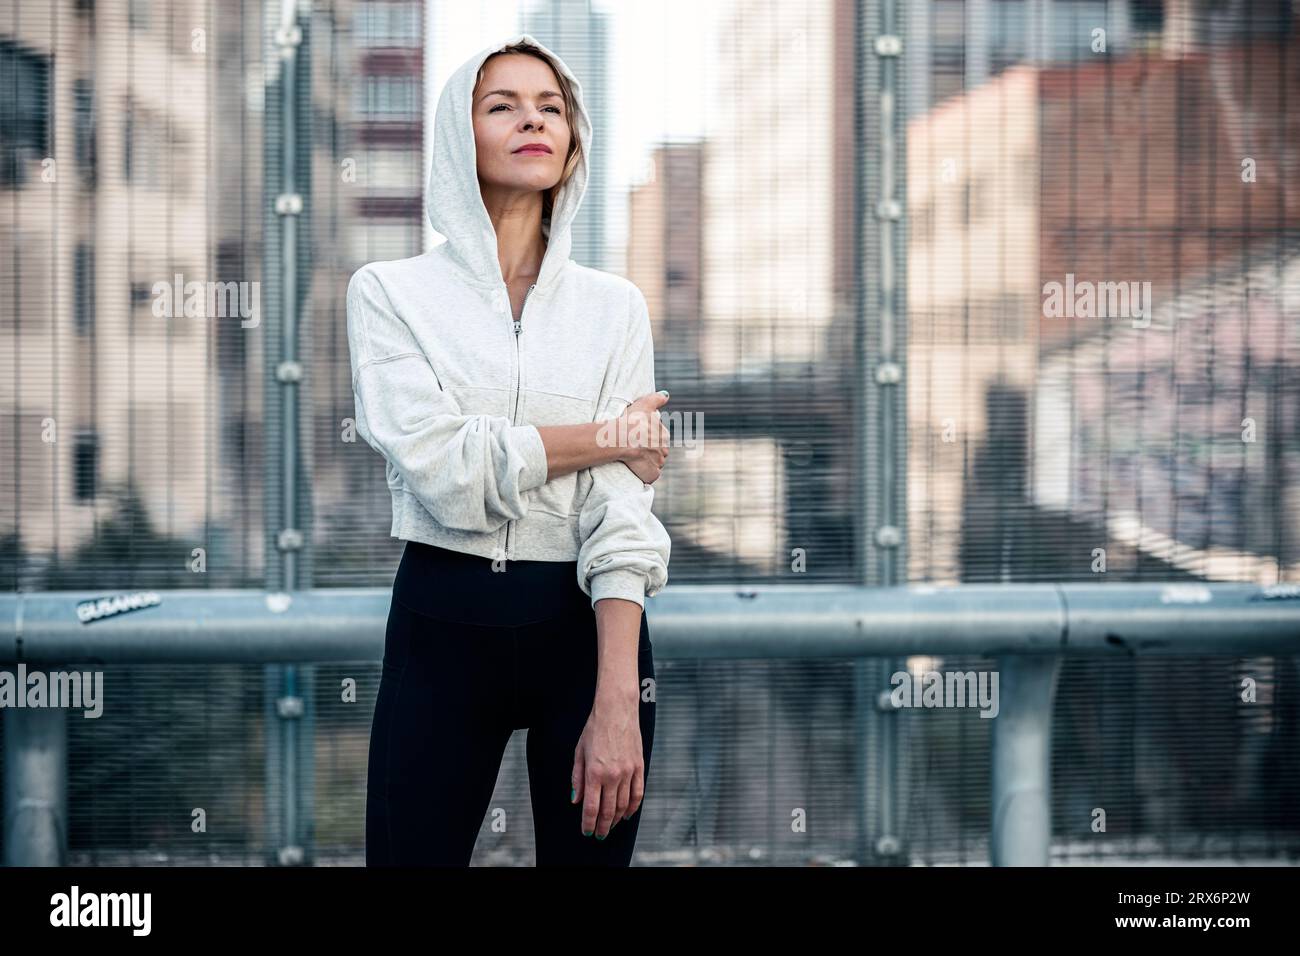 Thoughtful woman standing in front of railing Stock Photo